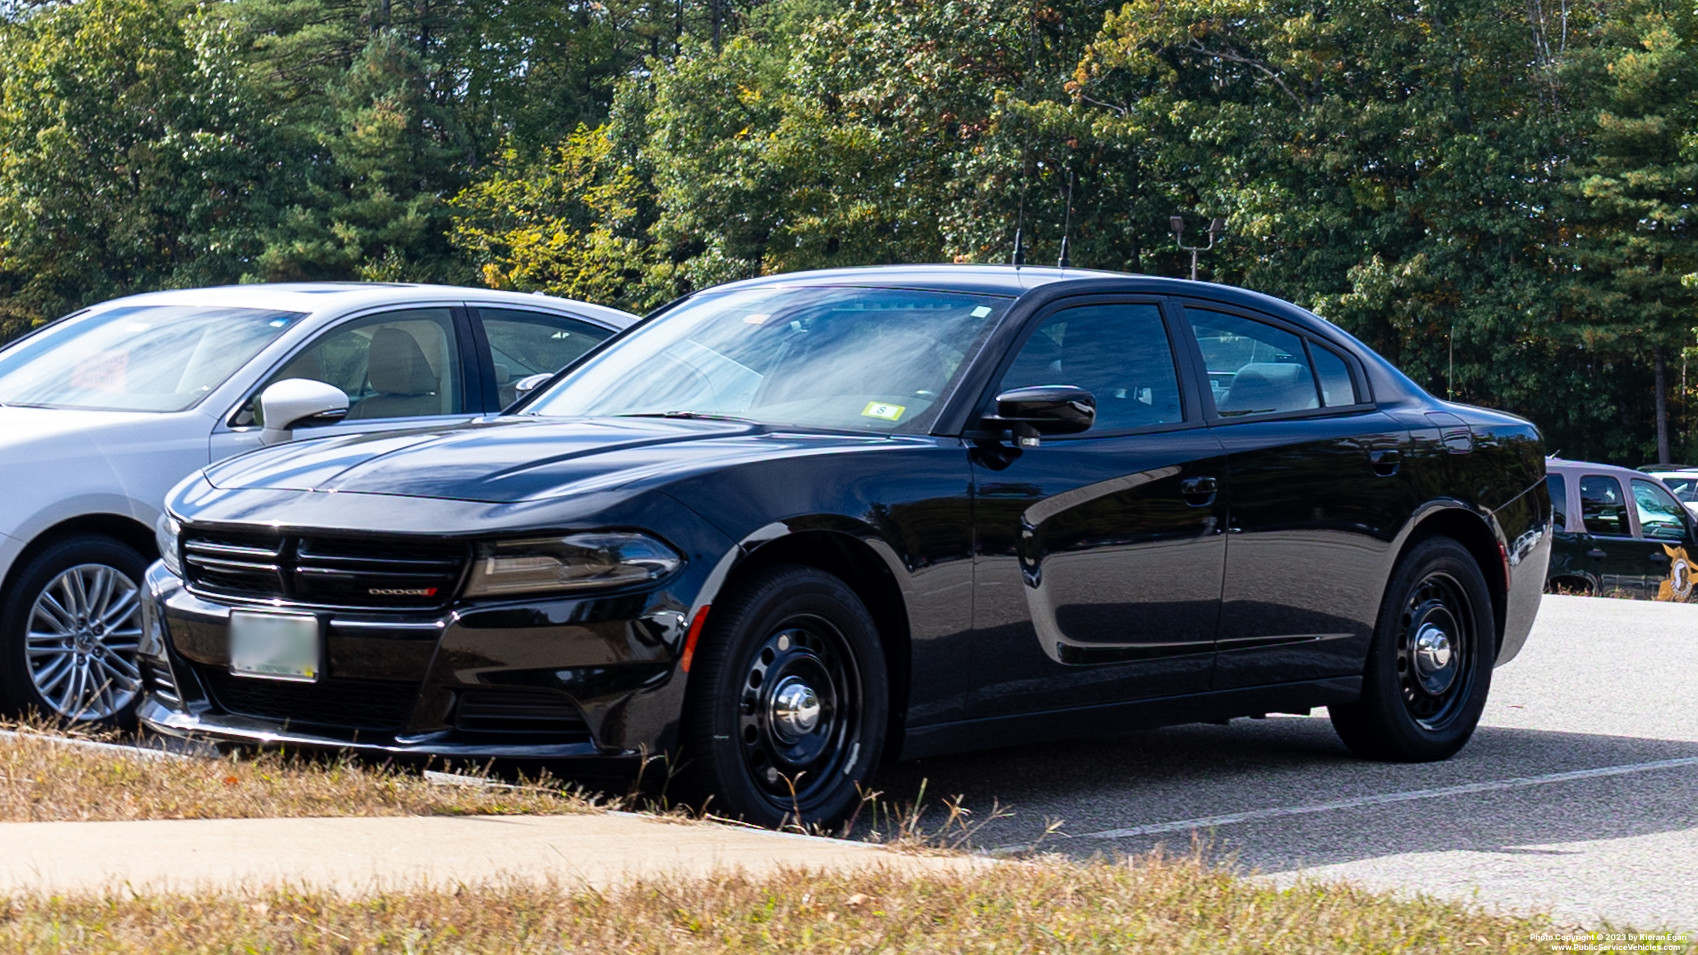 A photo  of New Hampshire State Police
            Unmarked Unit, a 2017-2021 Dodge Charger             taken by Kieran Egan